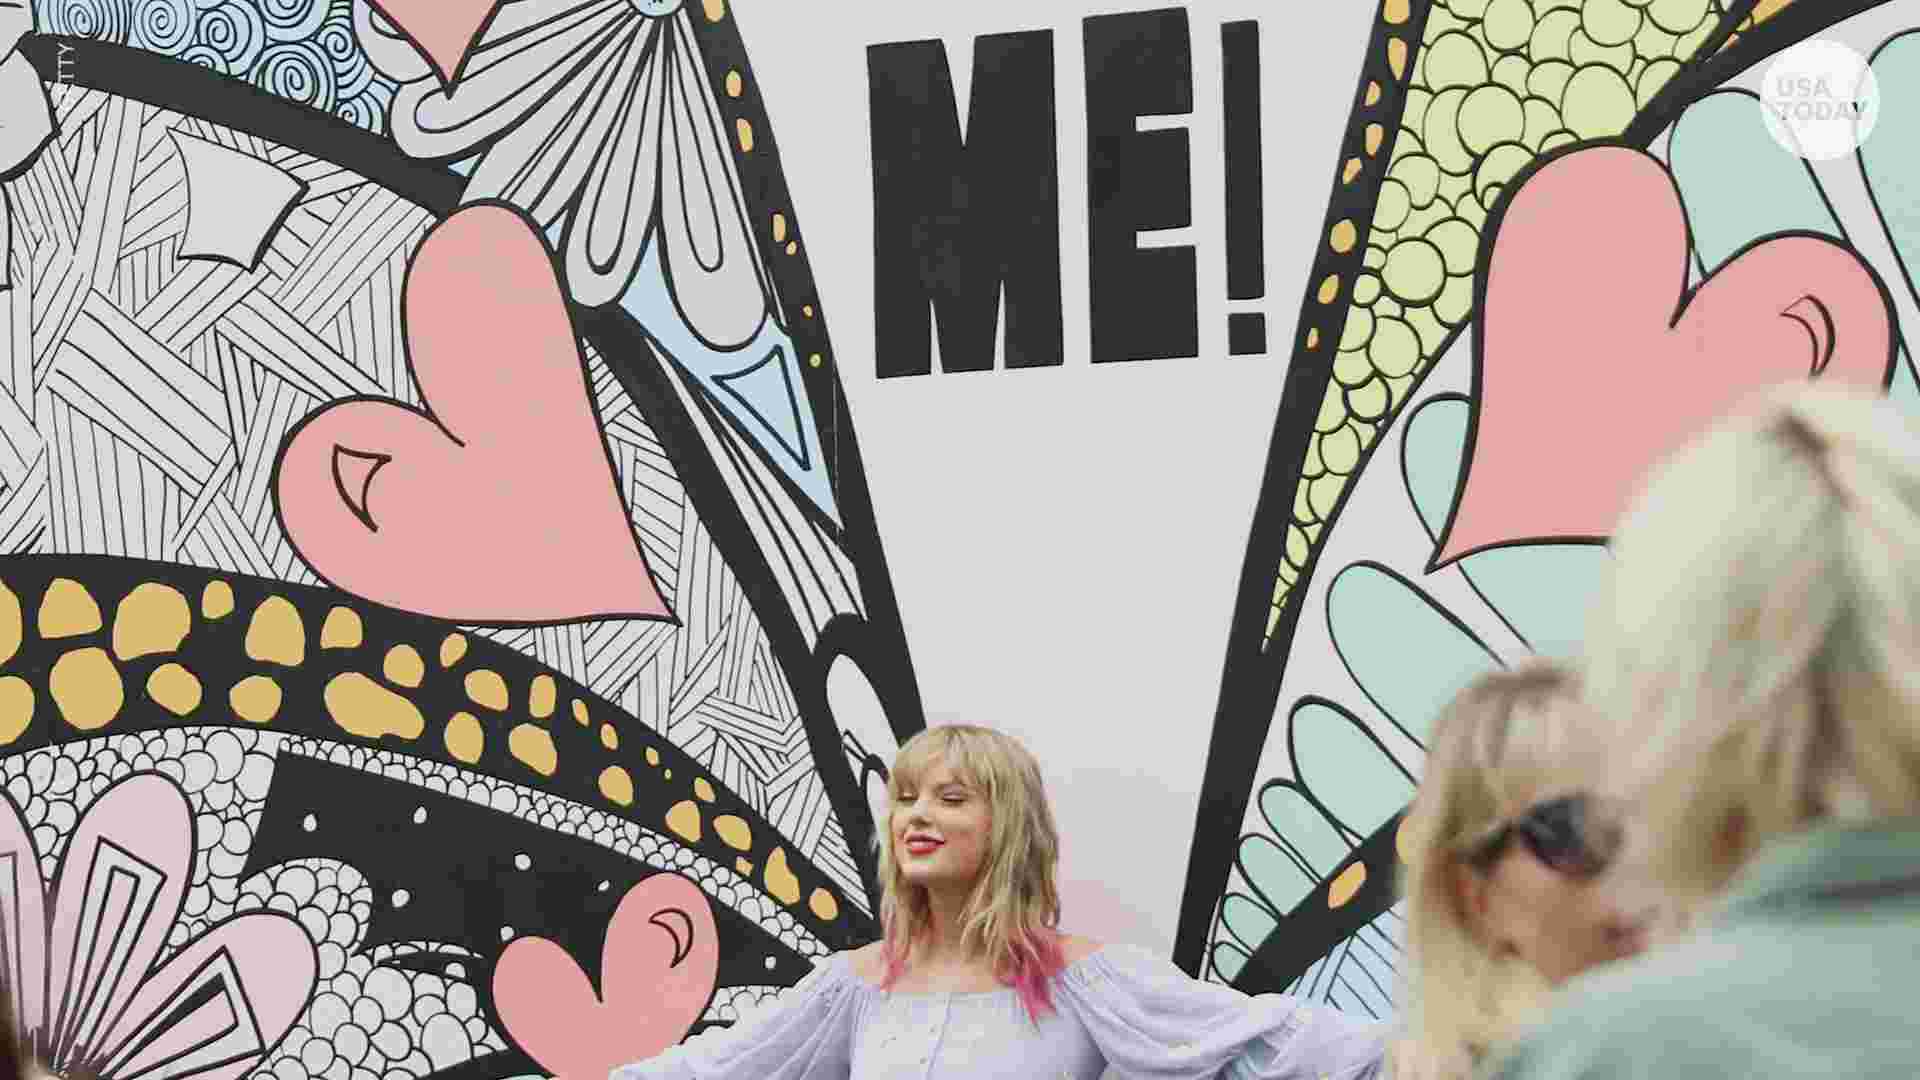 Taylor Swift drops 'ME!', plus sparkly music video